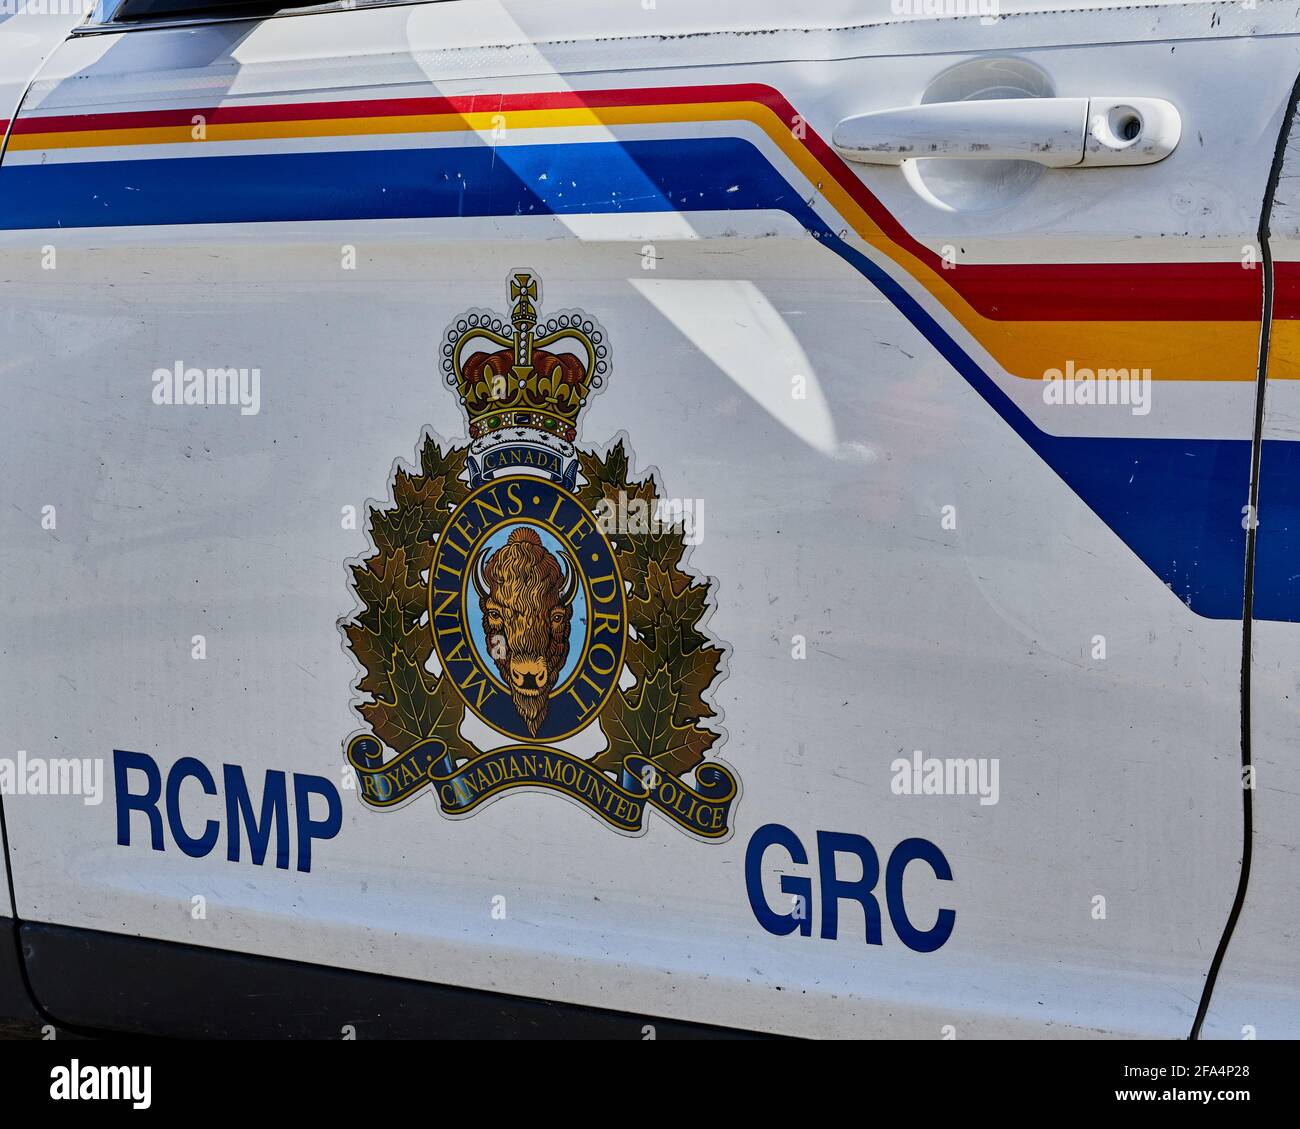 RCMP Royal Canadian Mounted Police Stockfoto